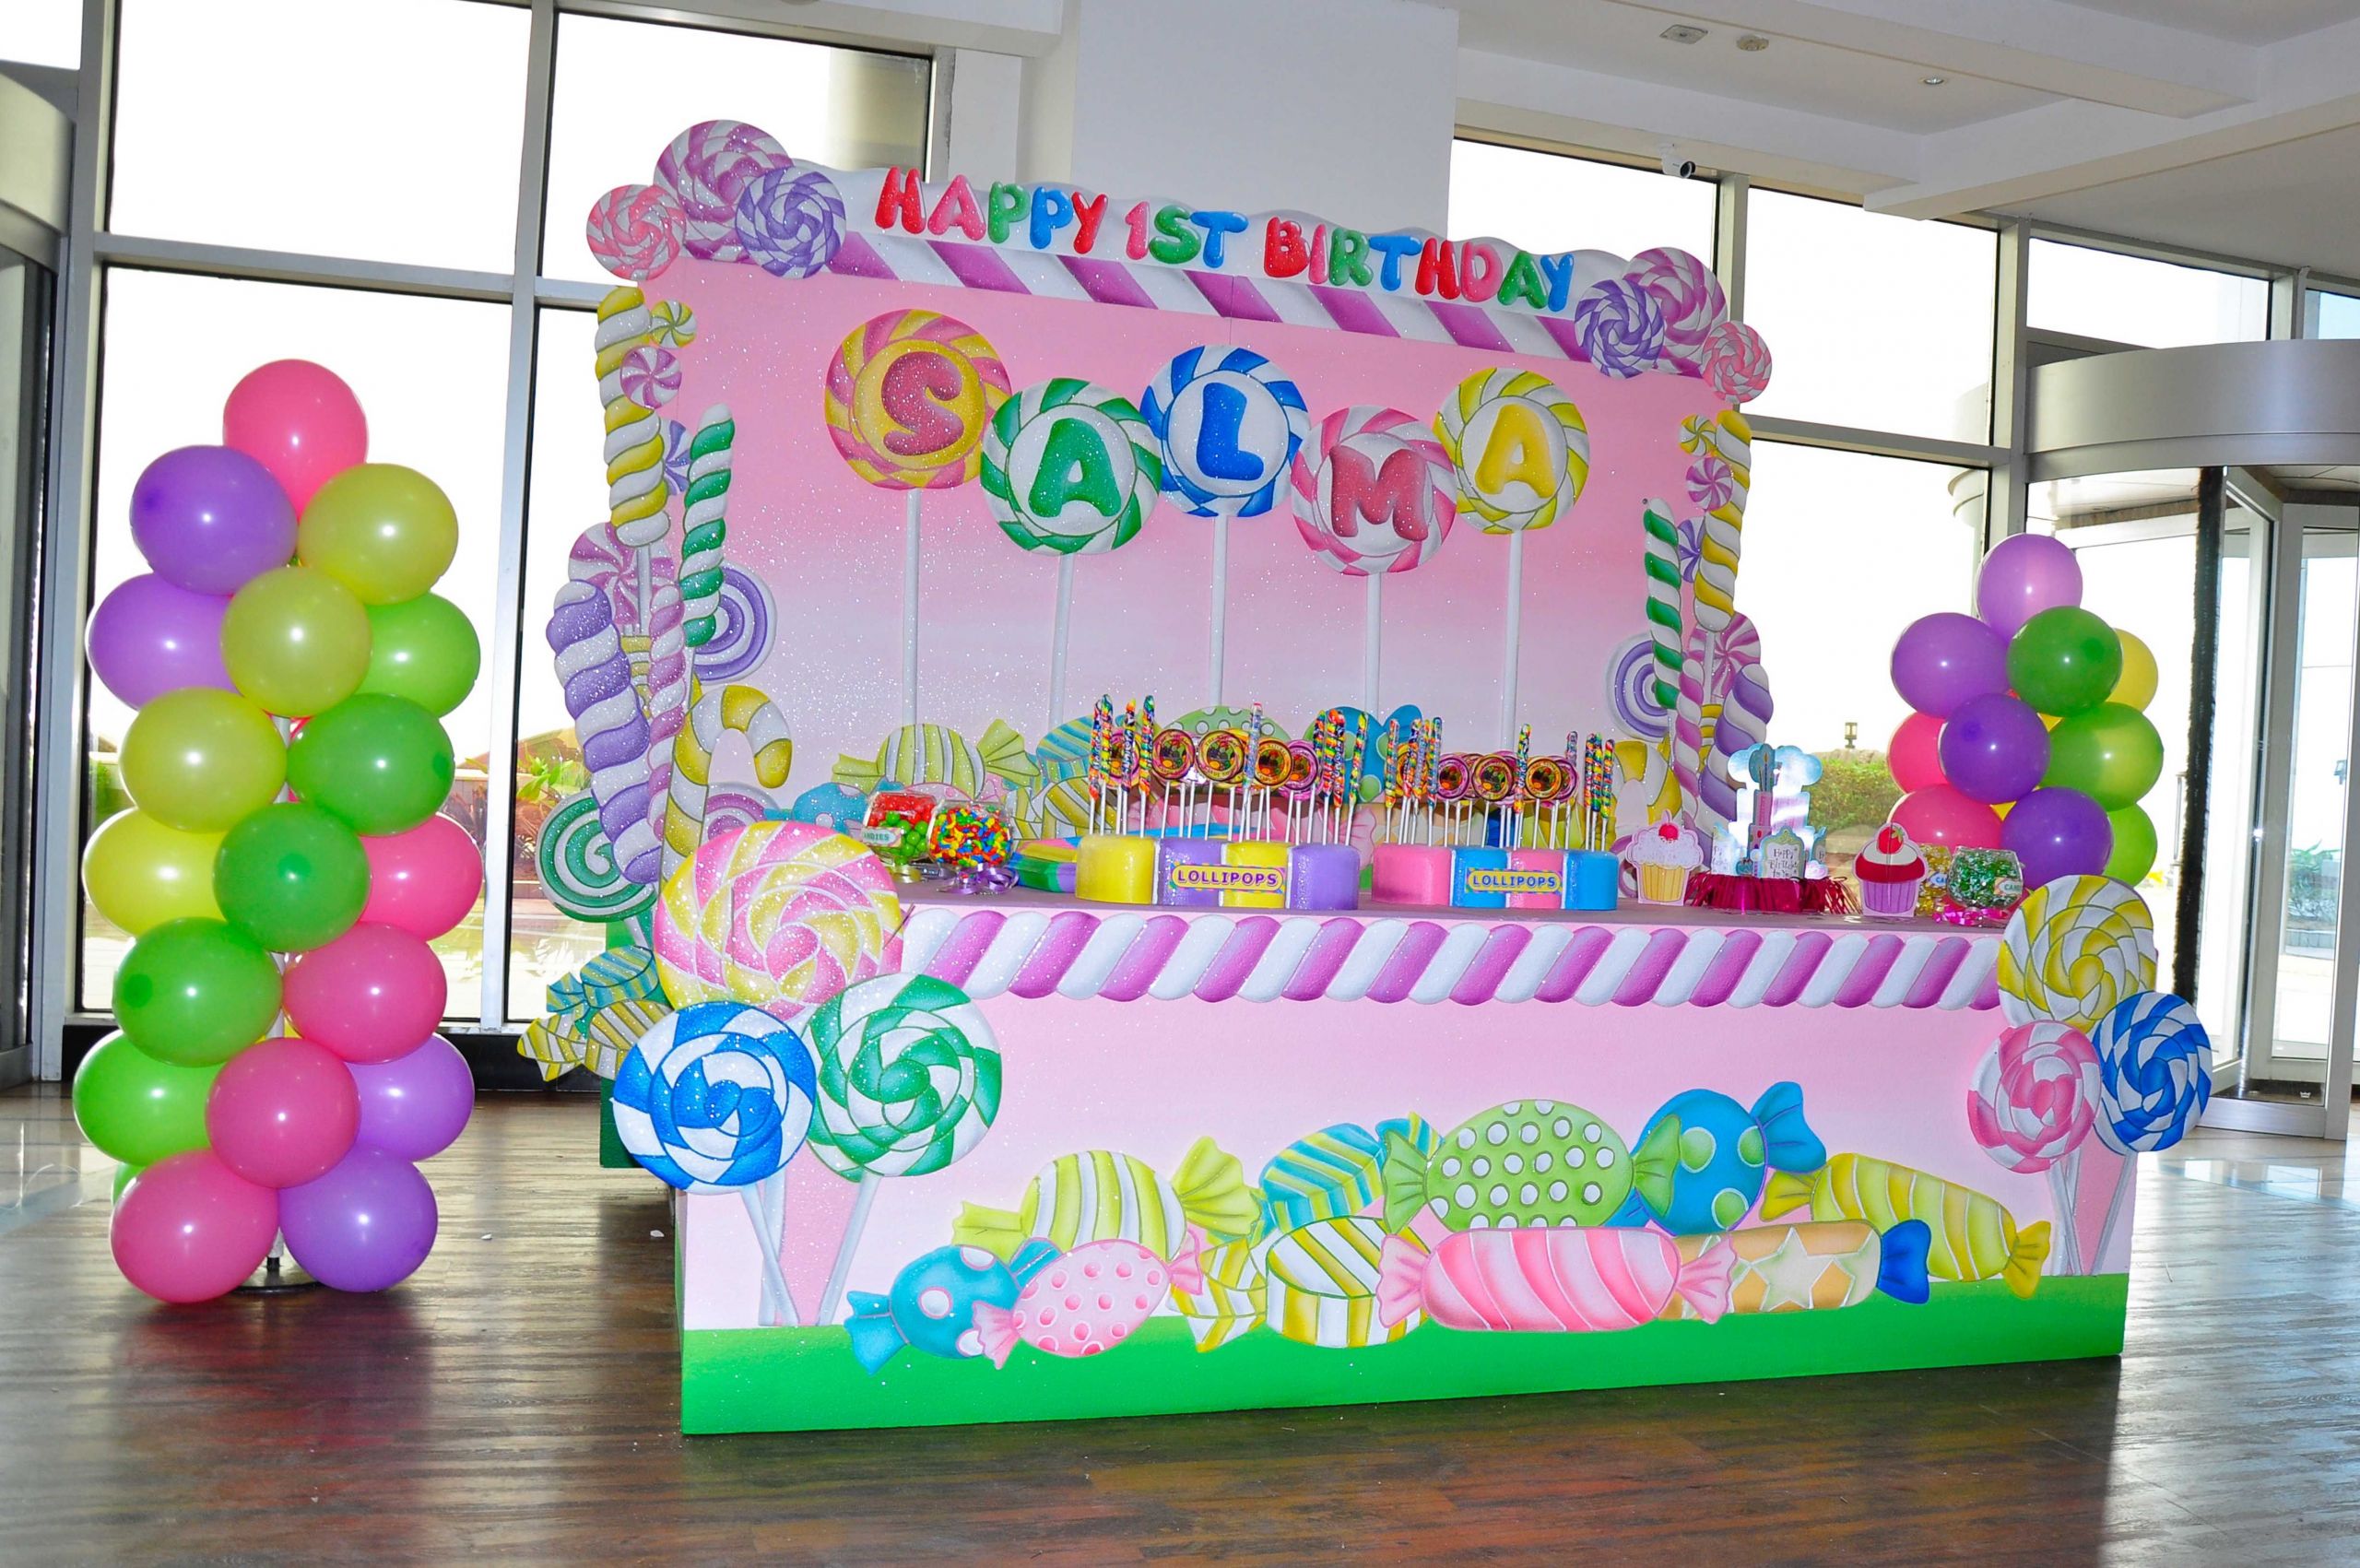 Candyland Birthday Party Ideas
 Candyland party decoration by fantasyparty